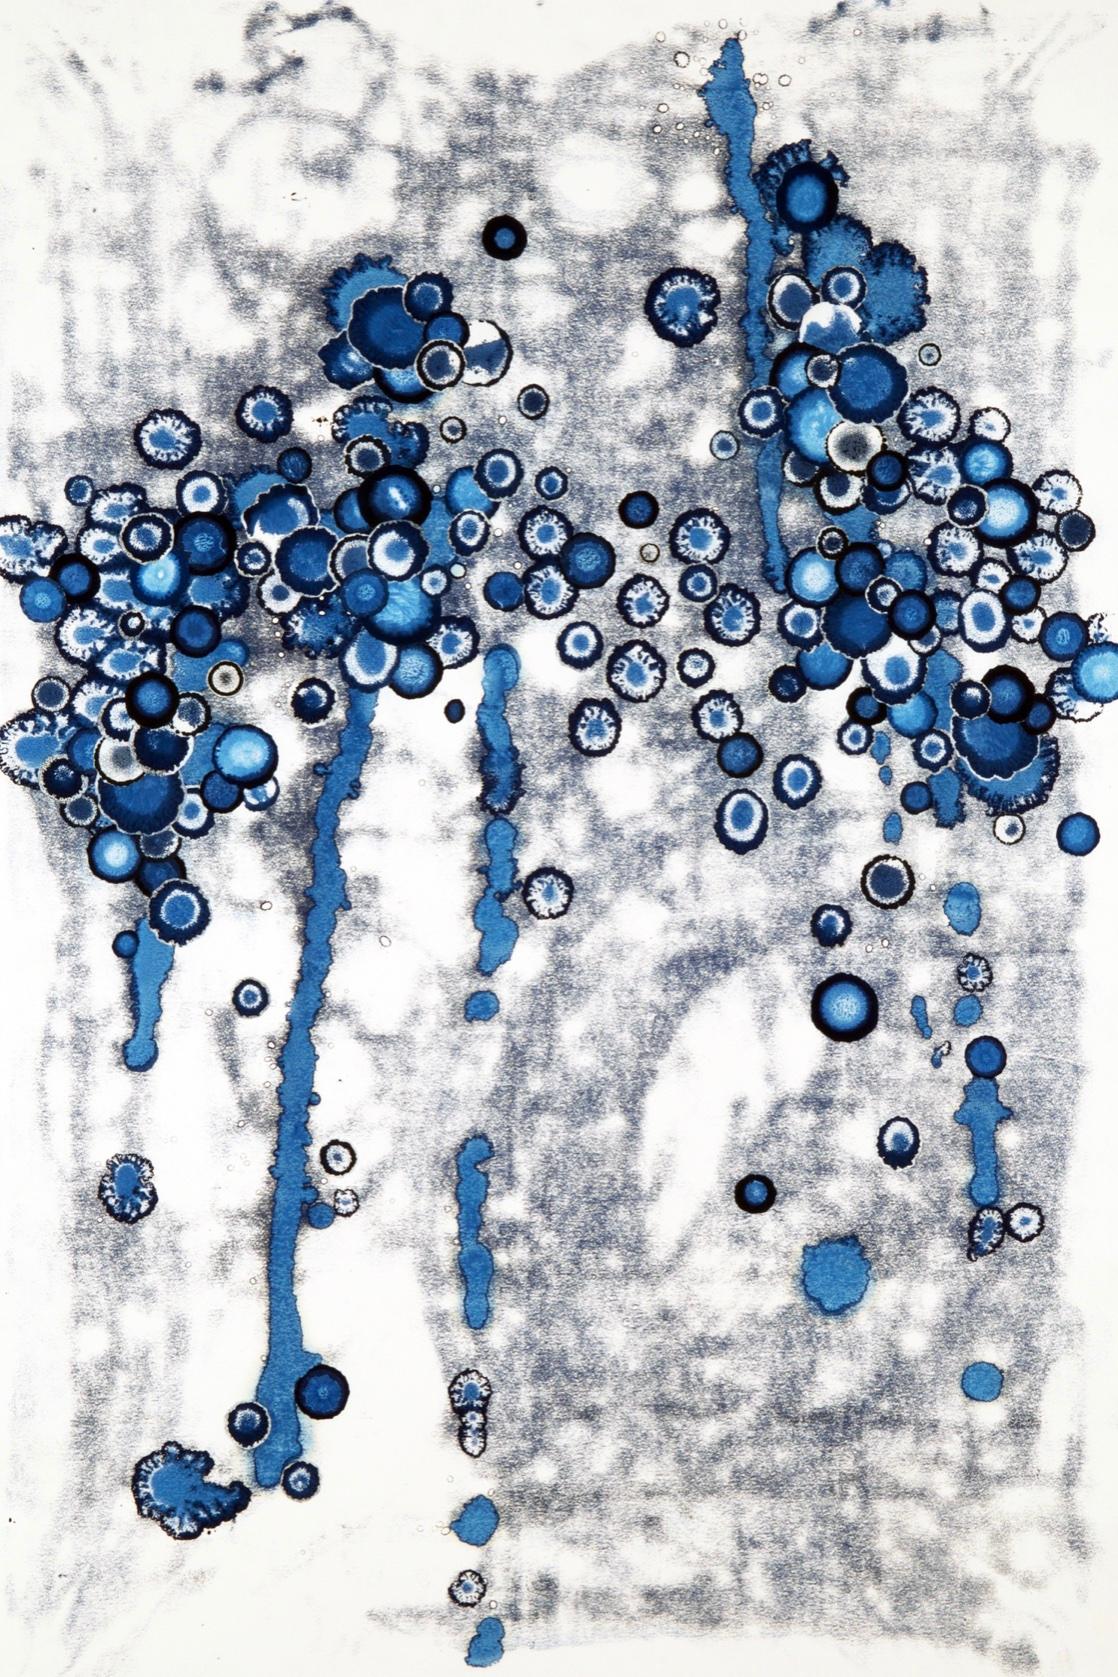 Alyssa Warren Abstract Painting - "Series 9, #04" abstract ink painting of dripping dots in shades of blue